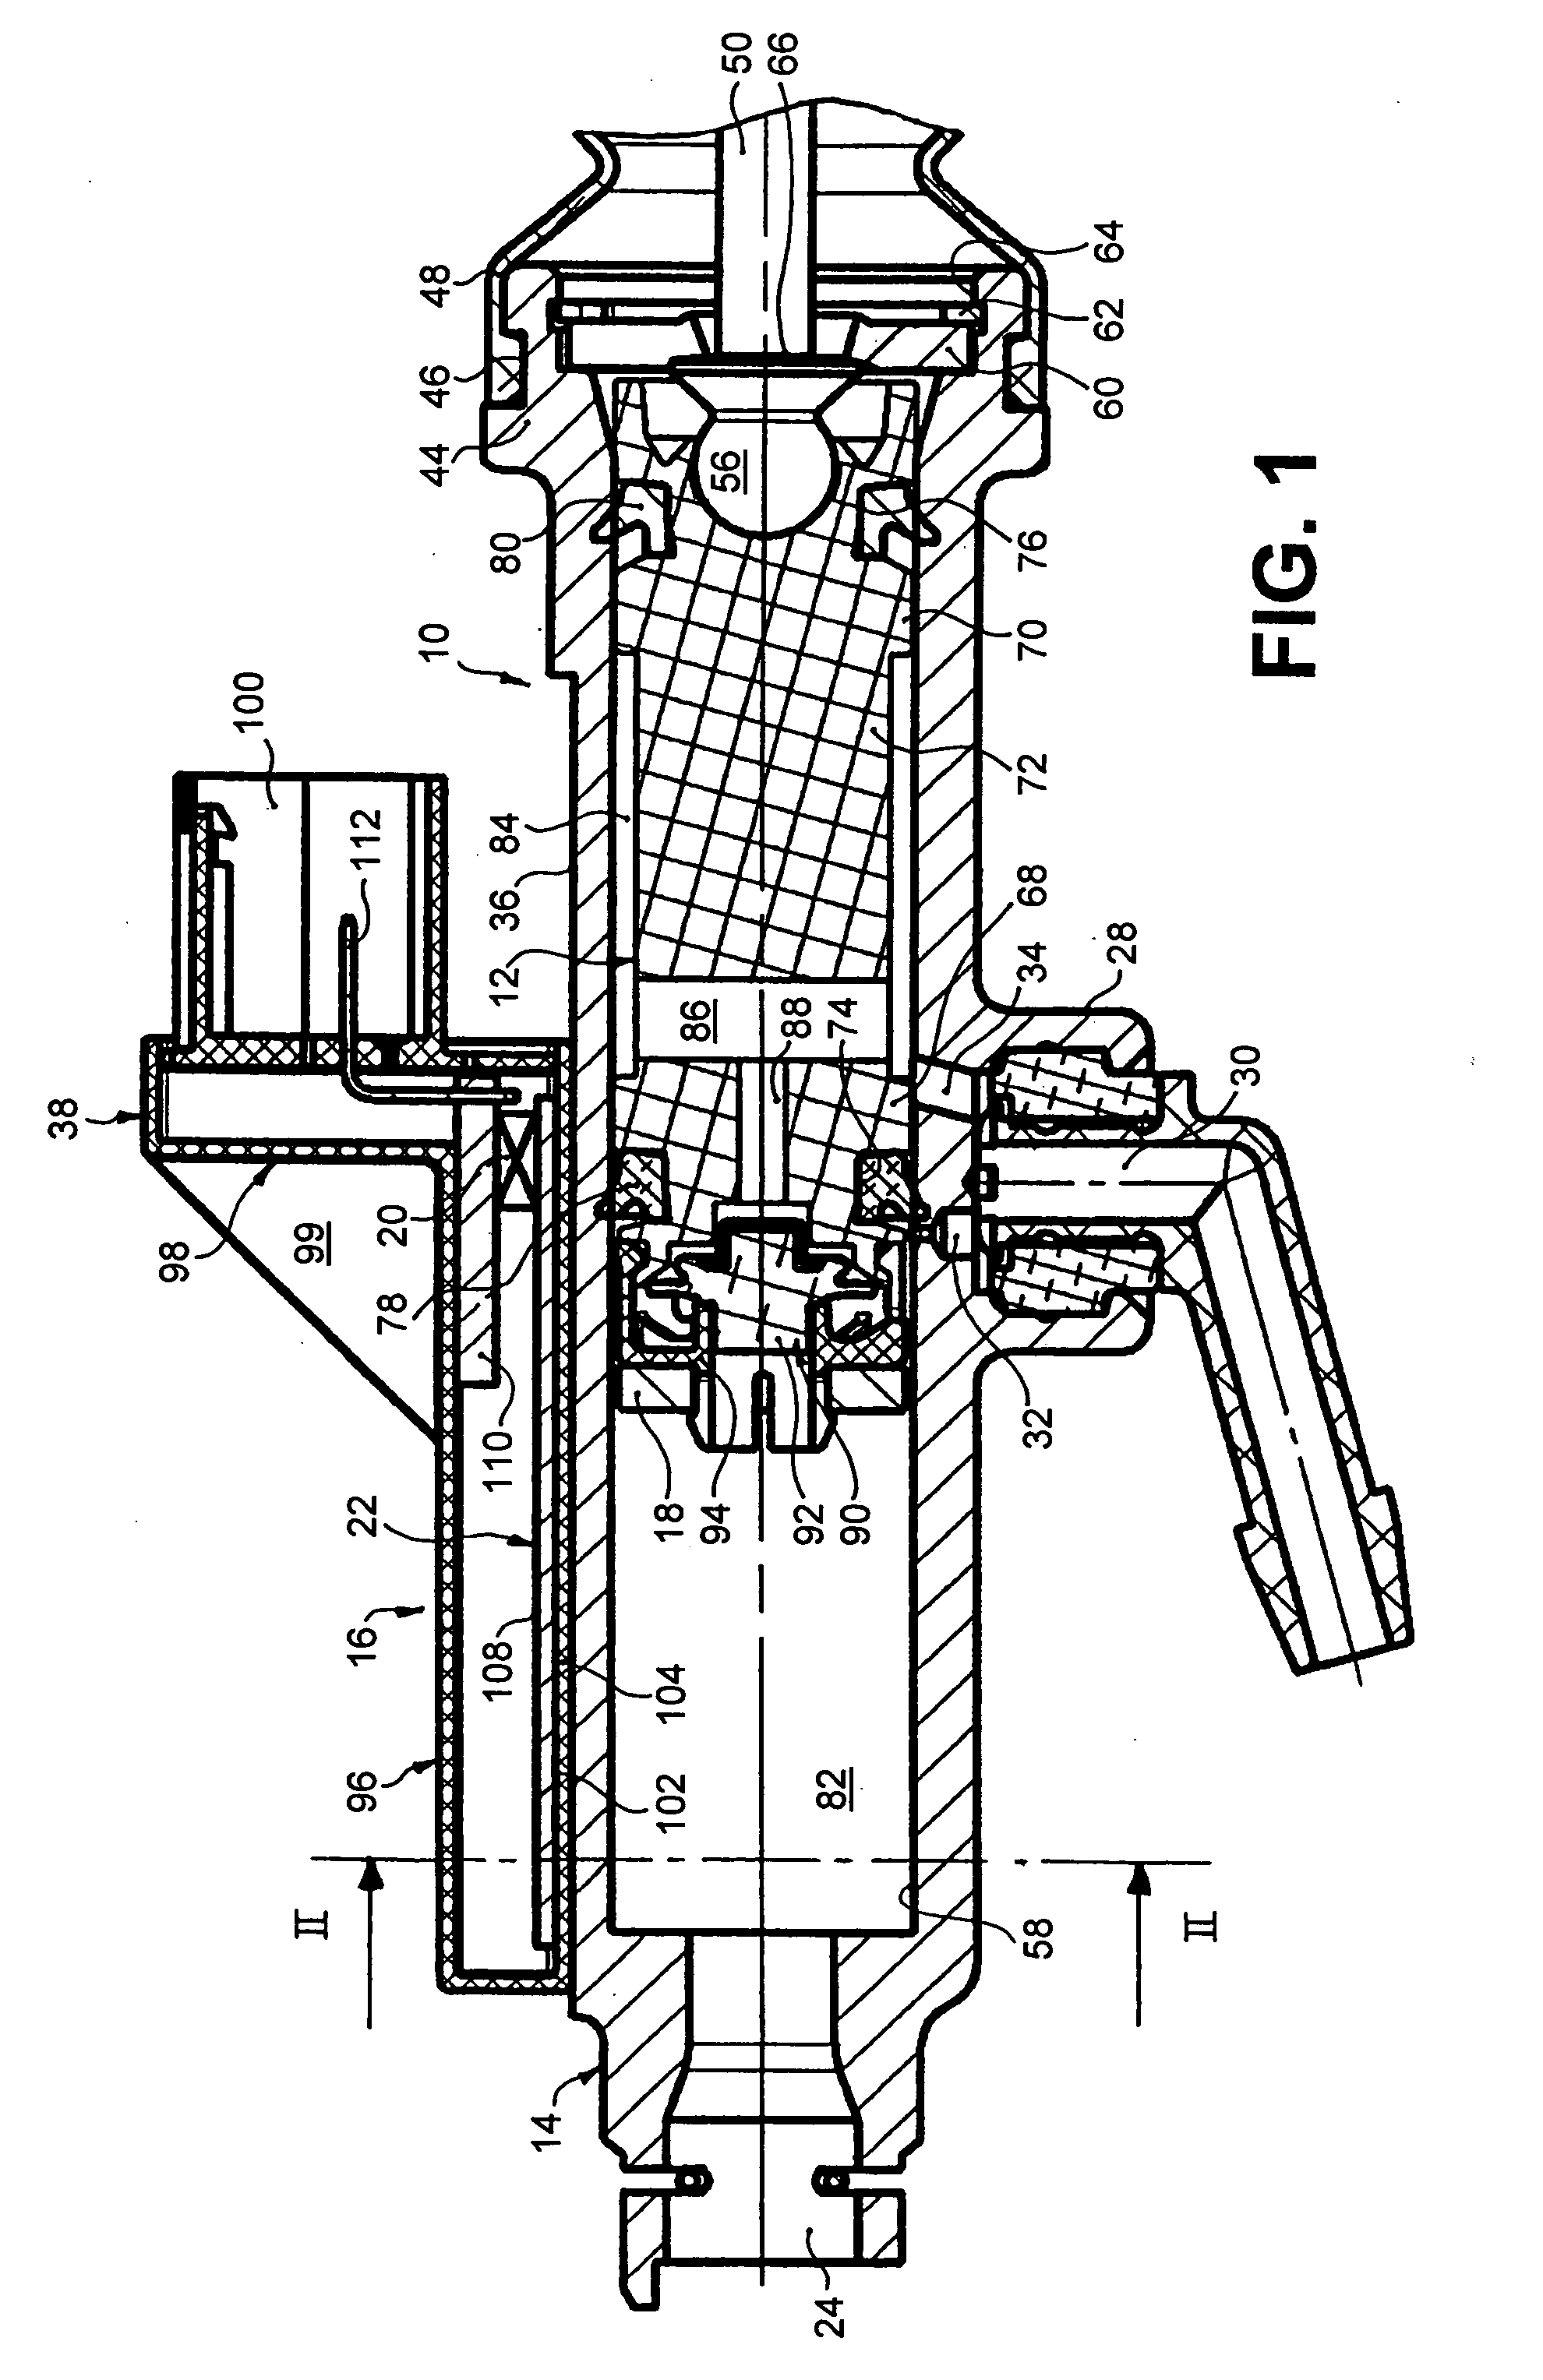 Device for sensing the axial position, in relation to the other component, of one of two components mobile relative to each other